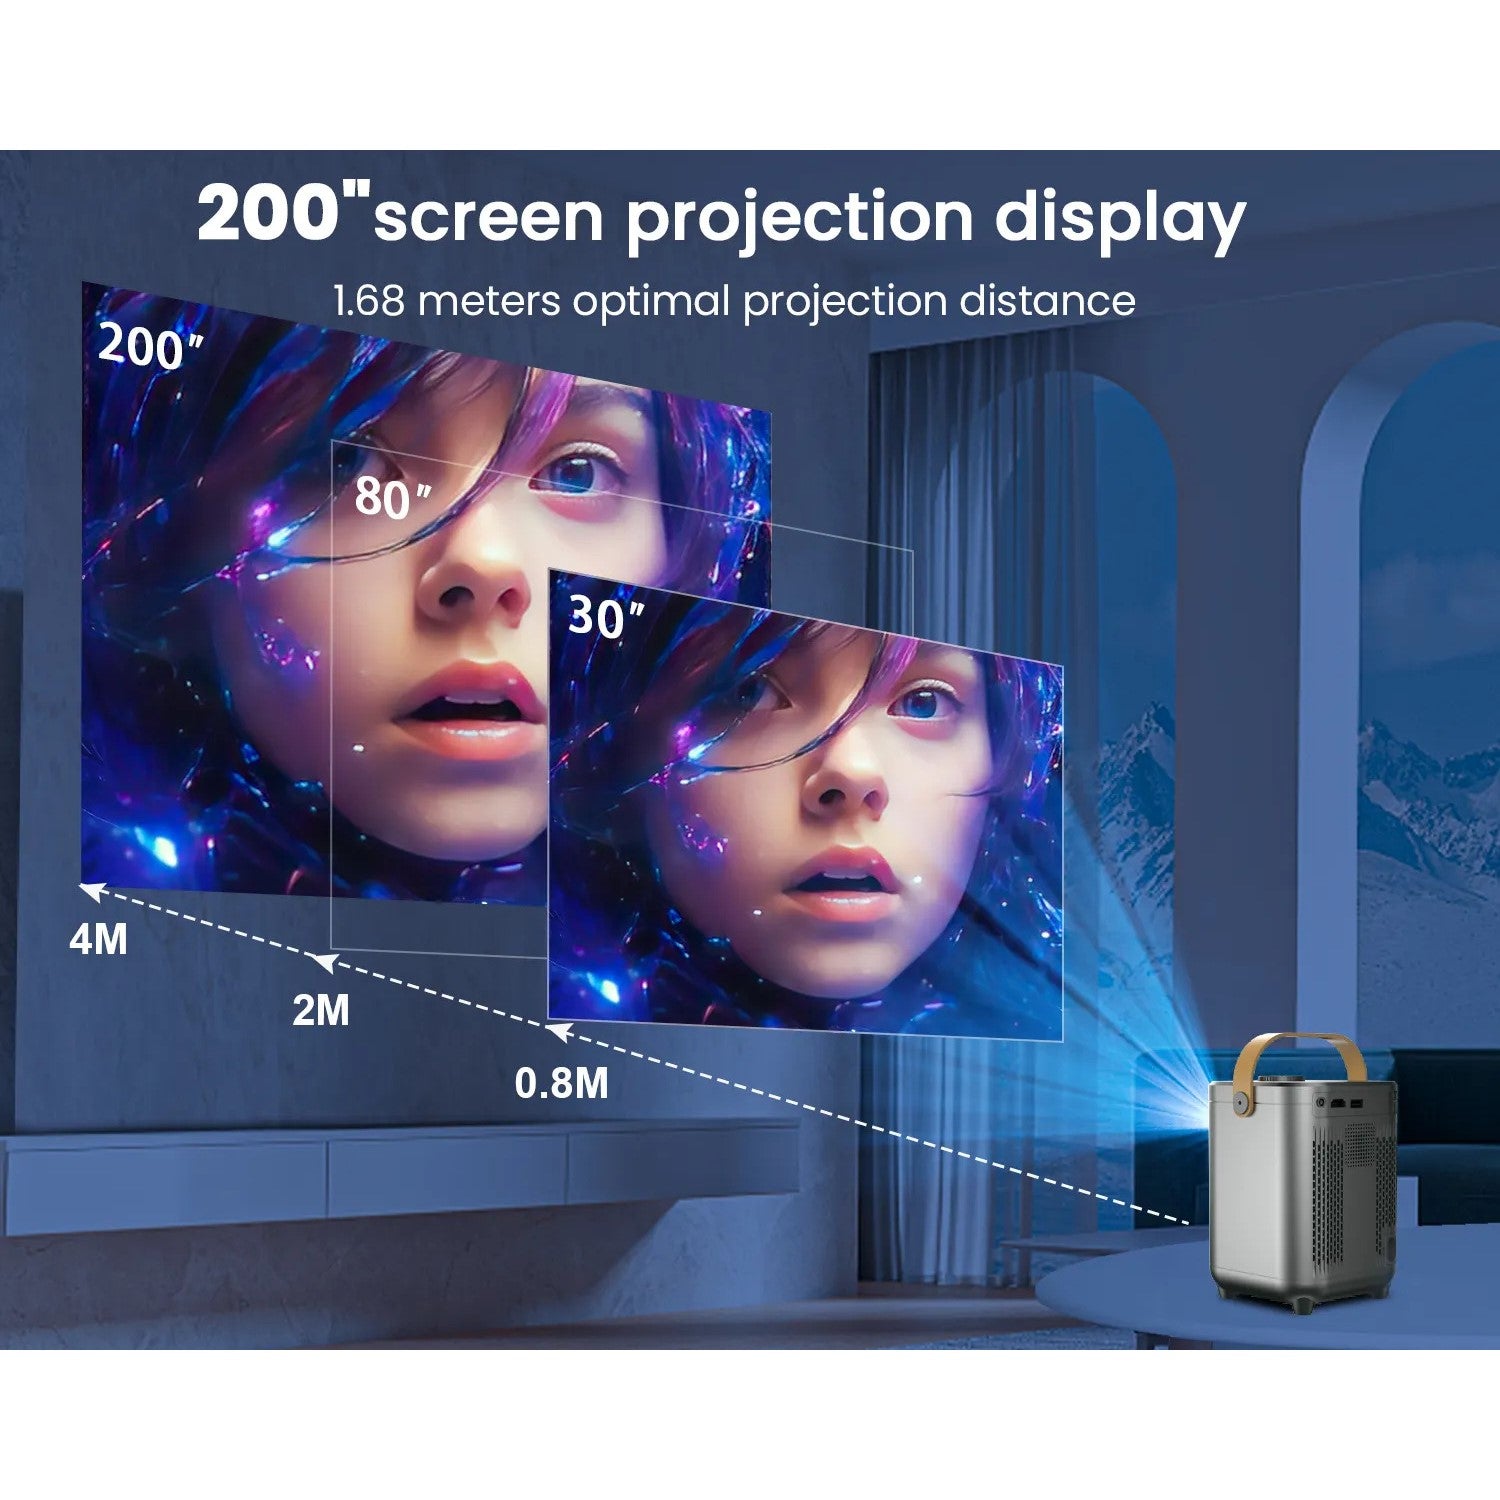 Transpeed S1 Smart Portable 4K Projector - WiFi, Bluetooth, Android 9 - 200'' Large Screen, Lightweight Design - 260 ANSI Brightness, 1080P Support, BT 5.0, WiFi 2.4G